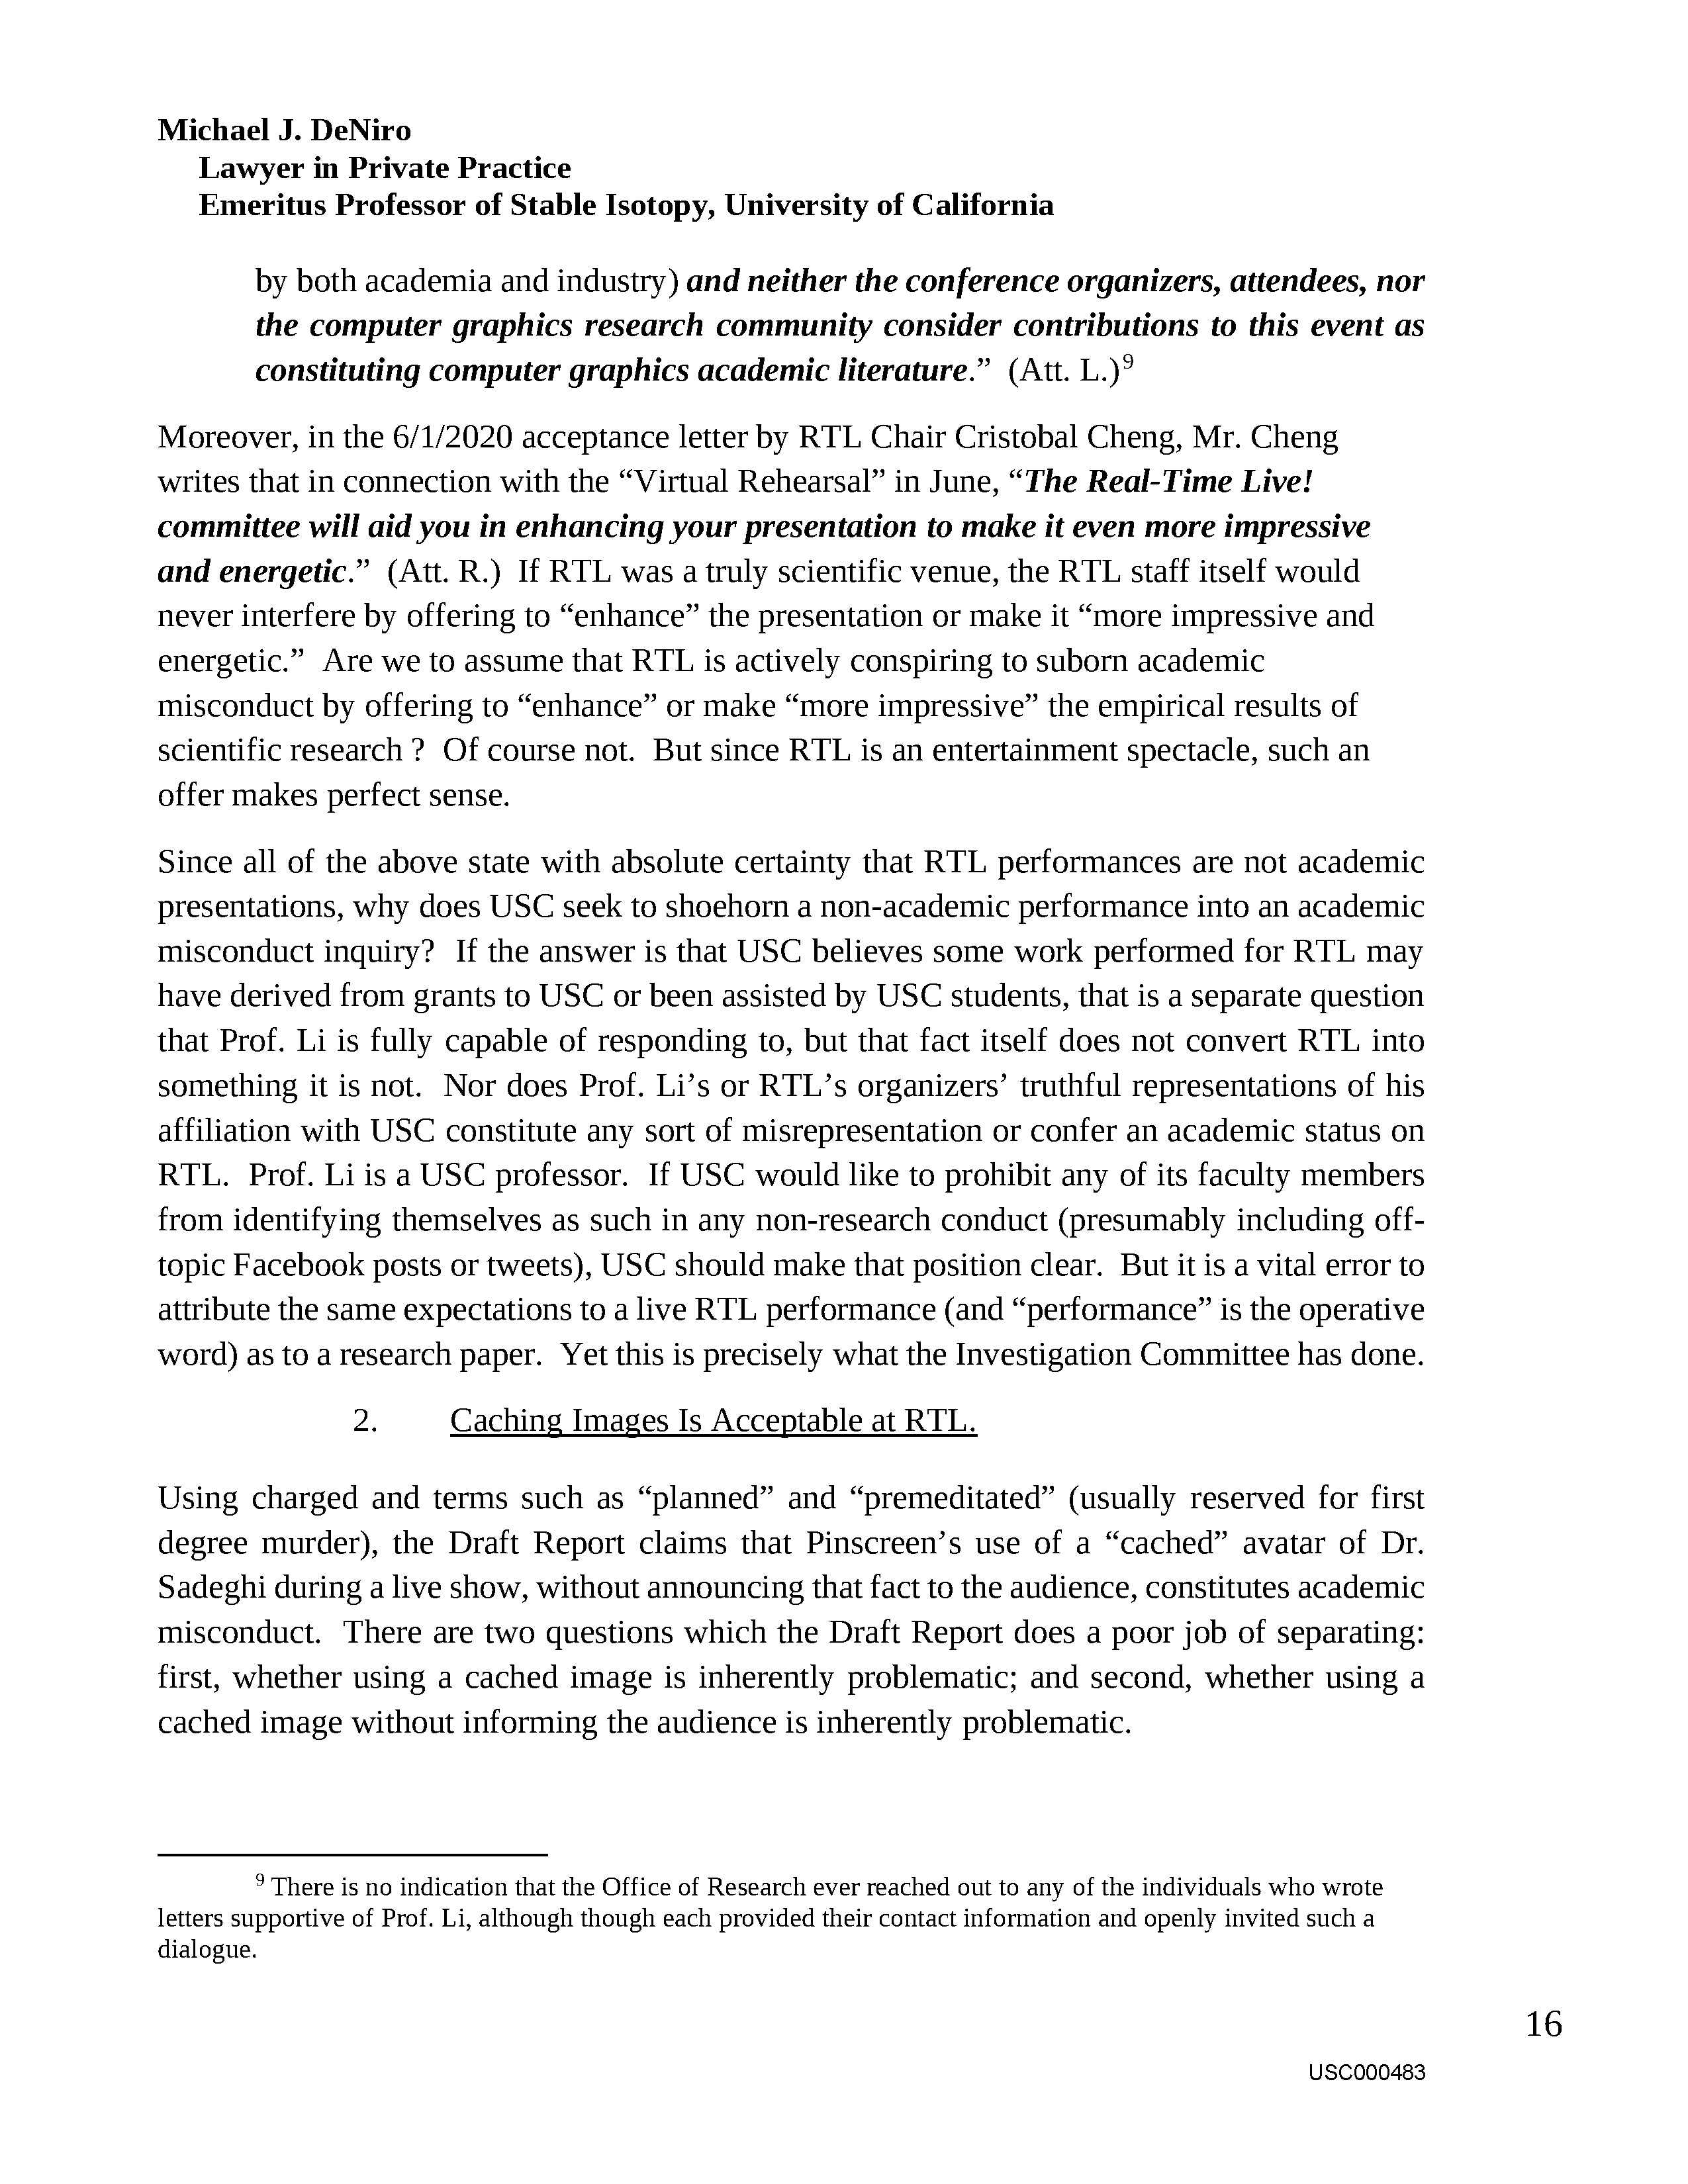 USC's Investigation Report re Hao Li's and Pinscreen's Scientific Misconduct at ACM SIGGRAPH RTL 2017 - Full Report Page 485